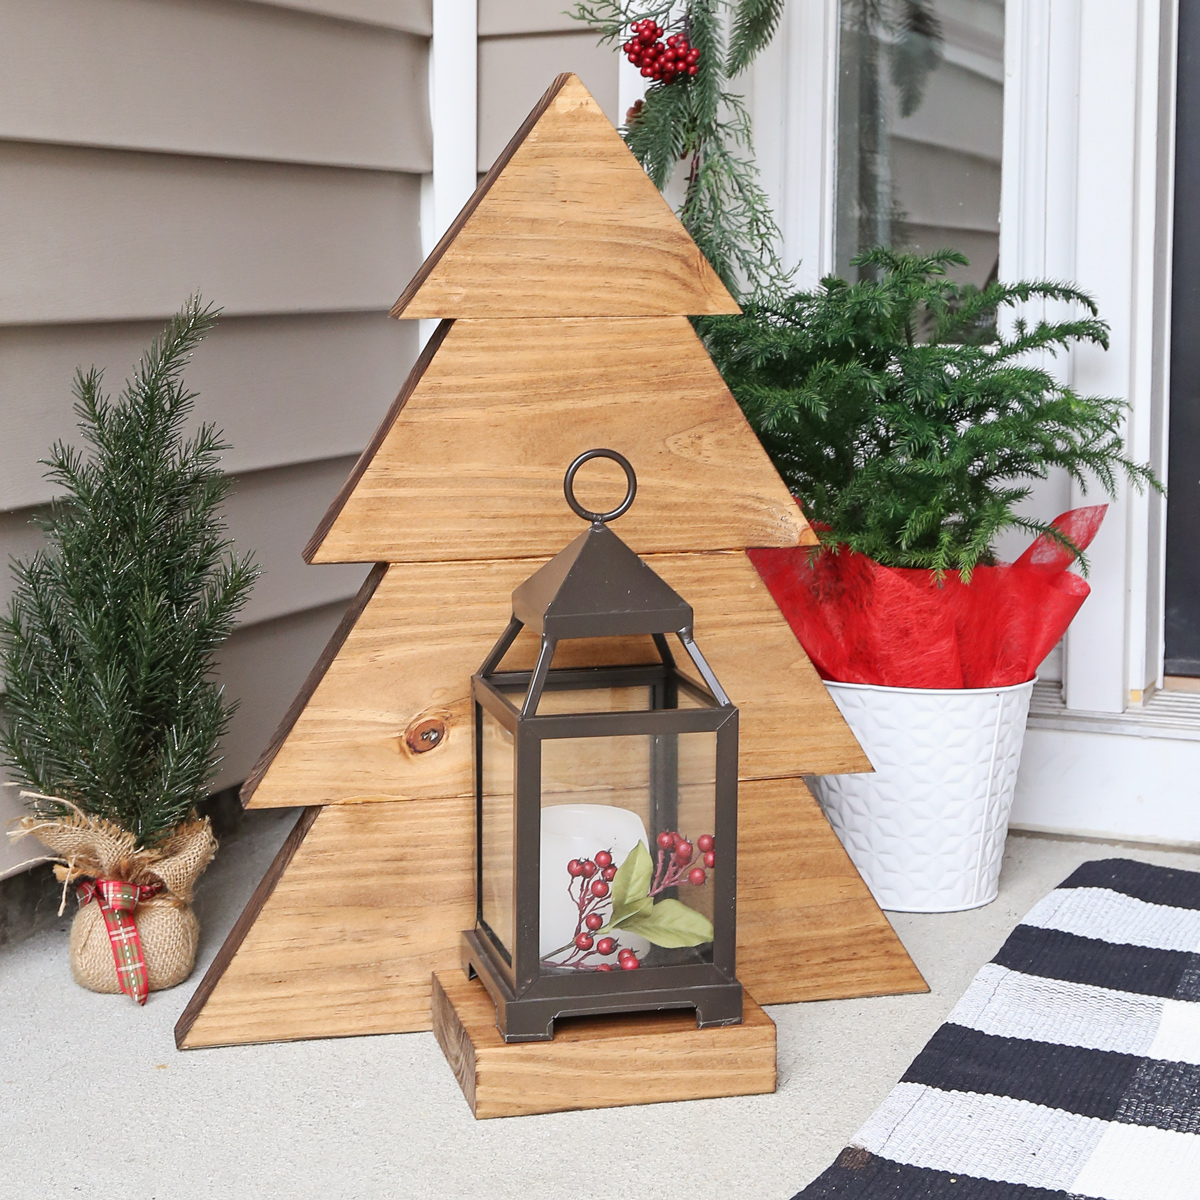 Keep your Christmas tree simple this year with these DIY wooden